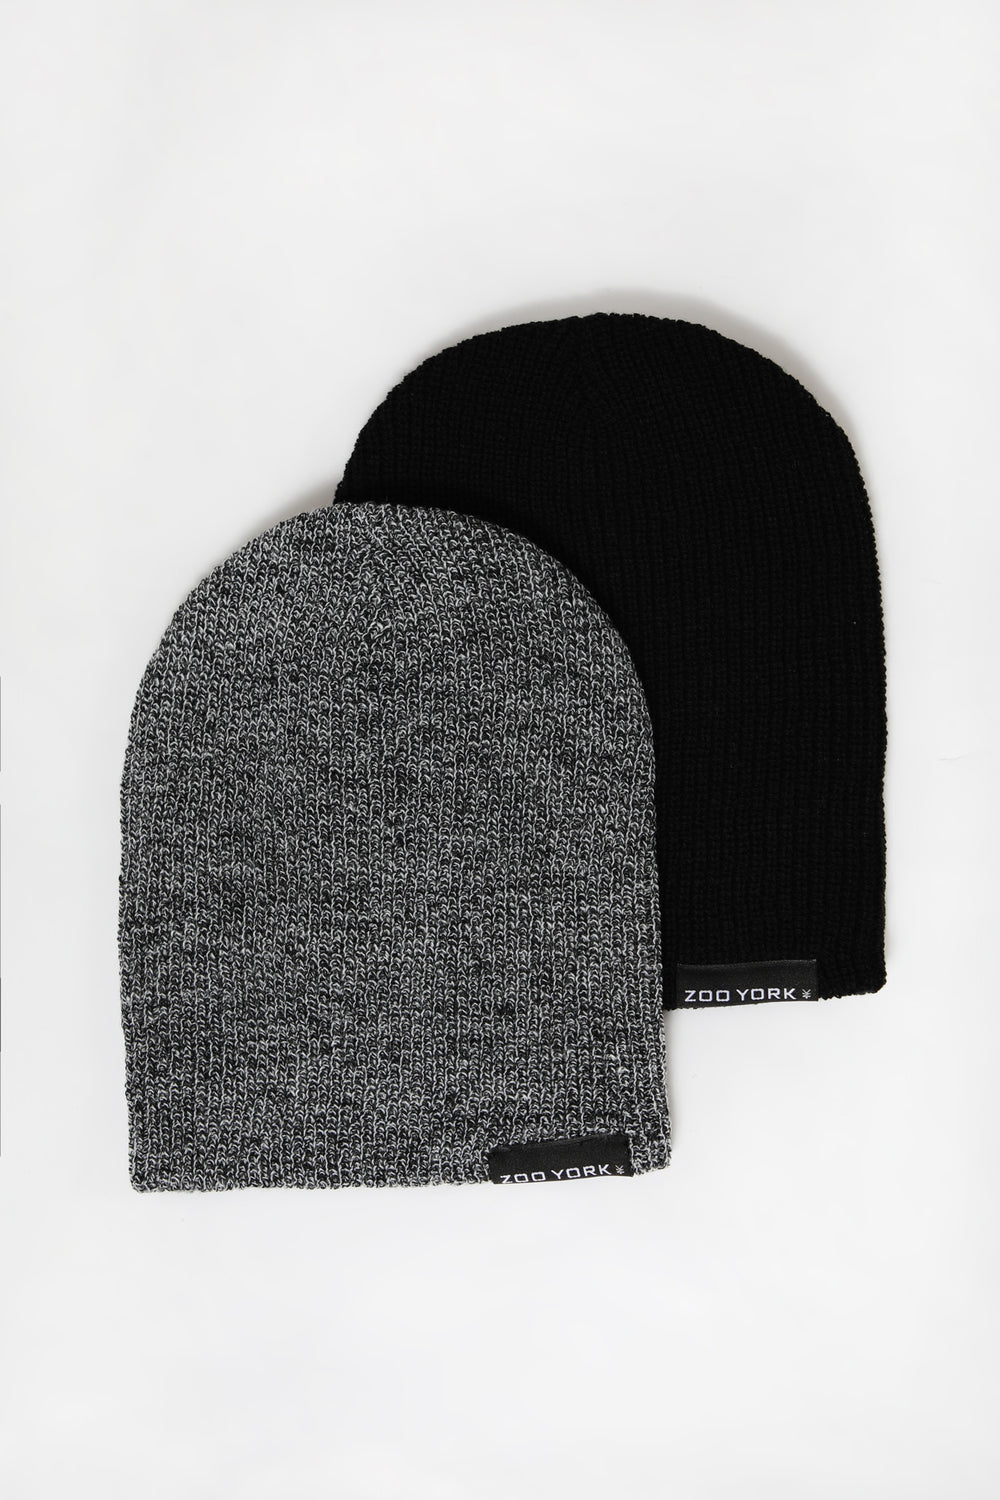 Zoo York Mens Slouch Beanie 2-Pack Black with White